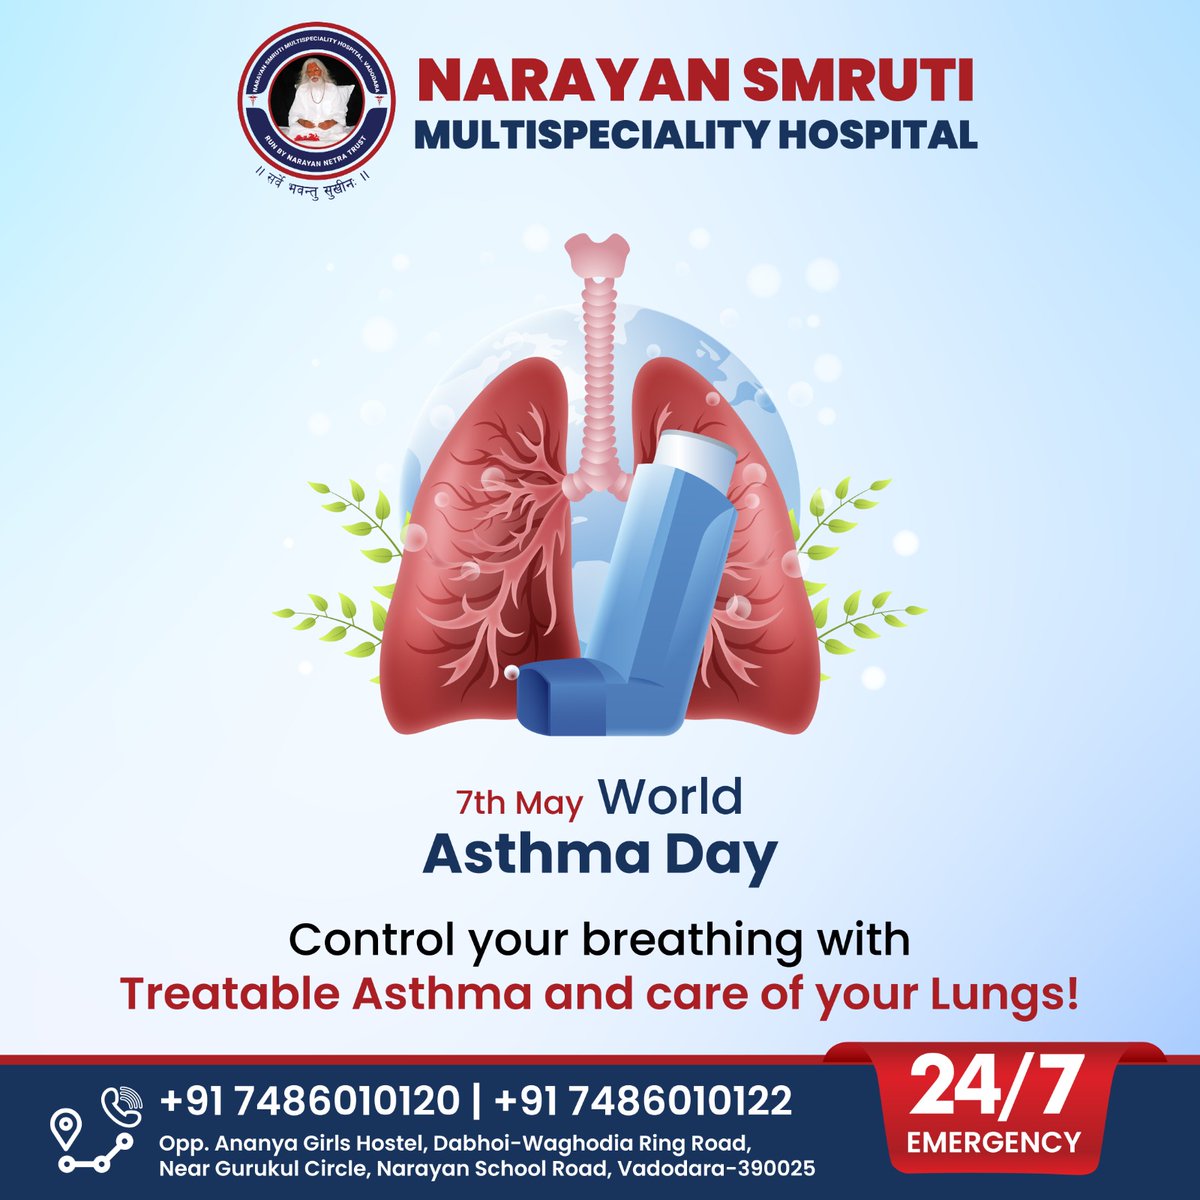 Think about your health, think about breathing healthily. On World Asthma Day, participation is crucial in sharing awareness and thoughts about healthy breathing and improving asthma. #WorldAsthmaDay #BreatheEasy #AsthmaAwareness #multispecialityhospital #narayansmrutihospital